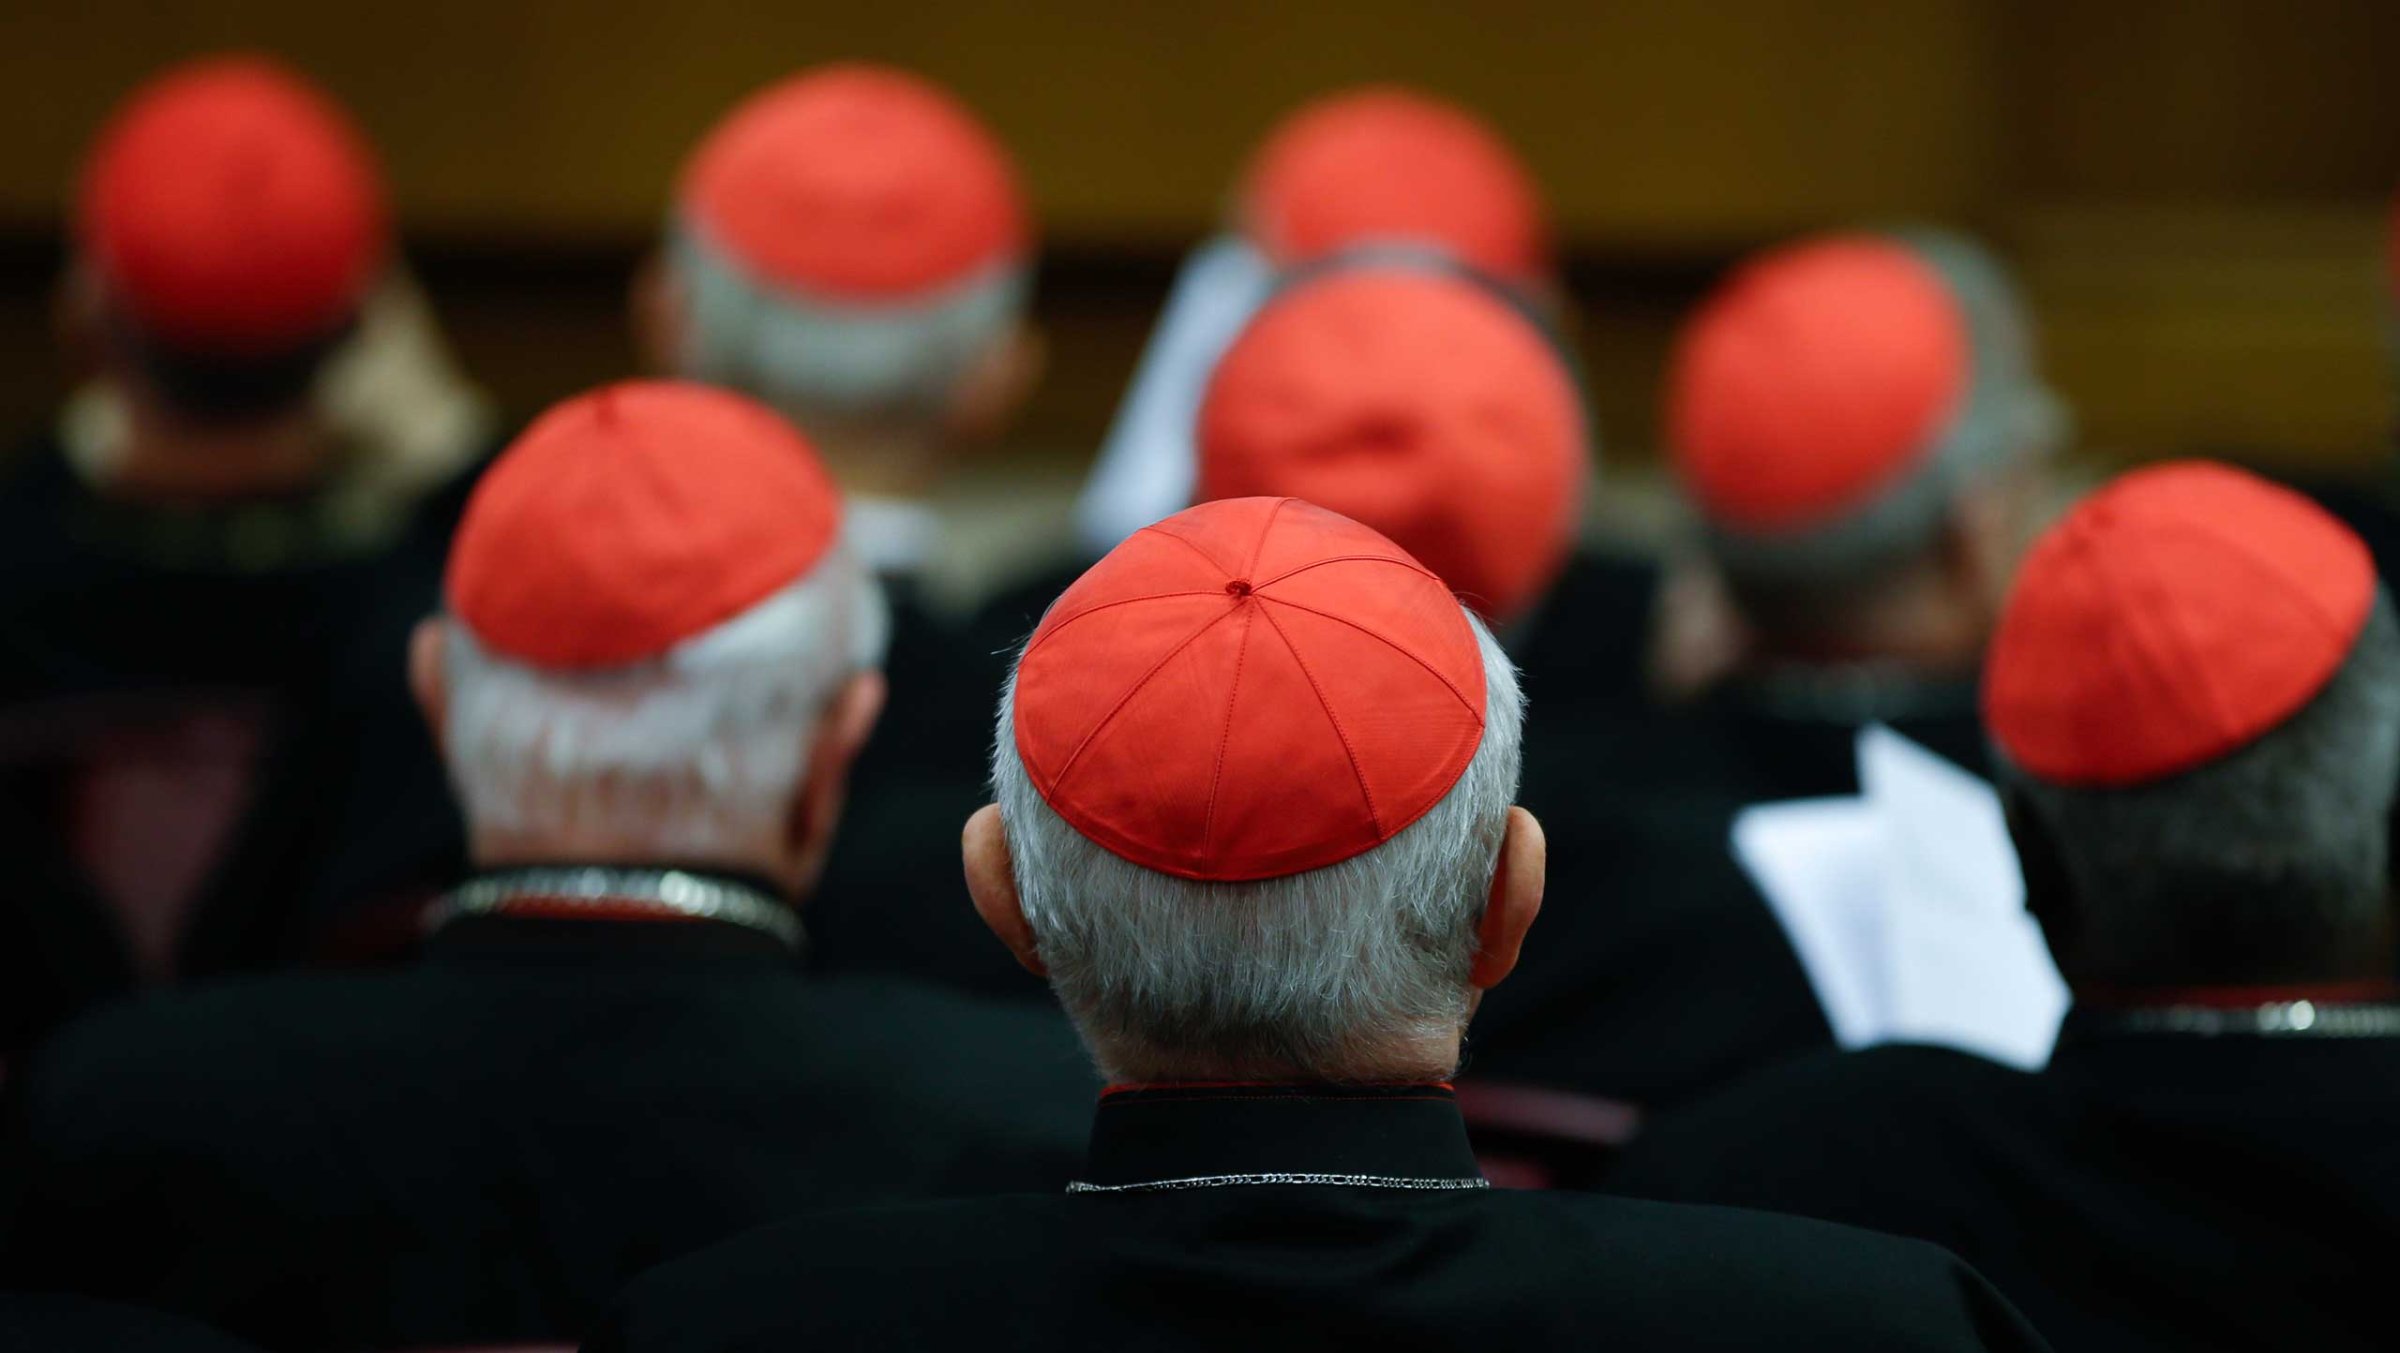 Cardinals listen to Pope Francis at the Vatican Oct. 20, 2014.